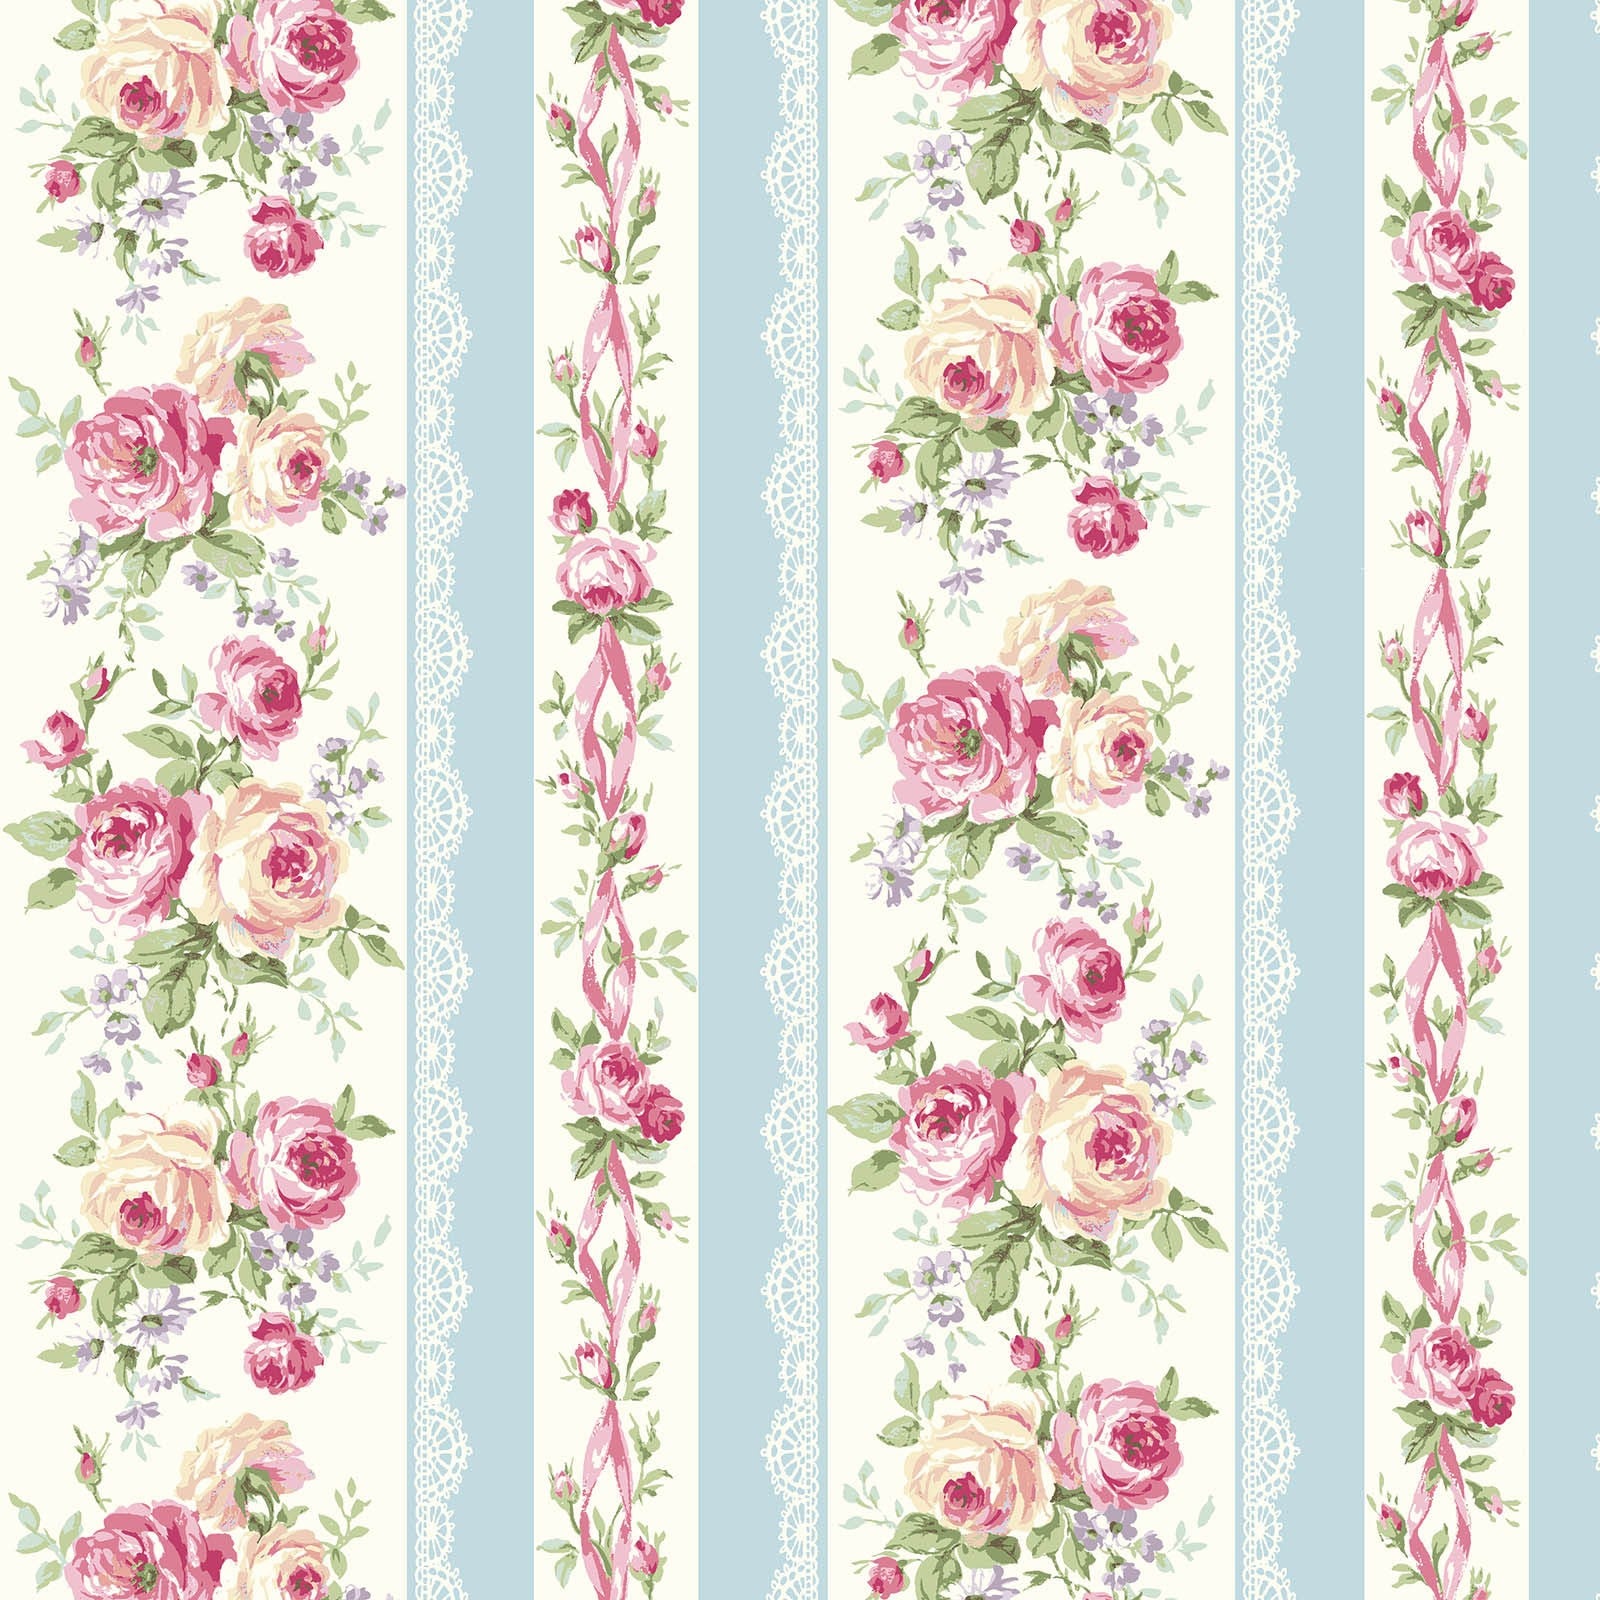 Rose Waltz RuRu Bouquet cotton fabric by Quilt Gate Ru2450-12D Roses and Ribbons on Blue